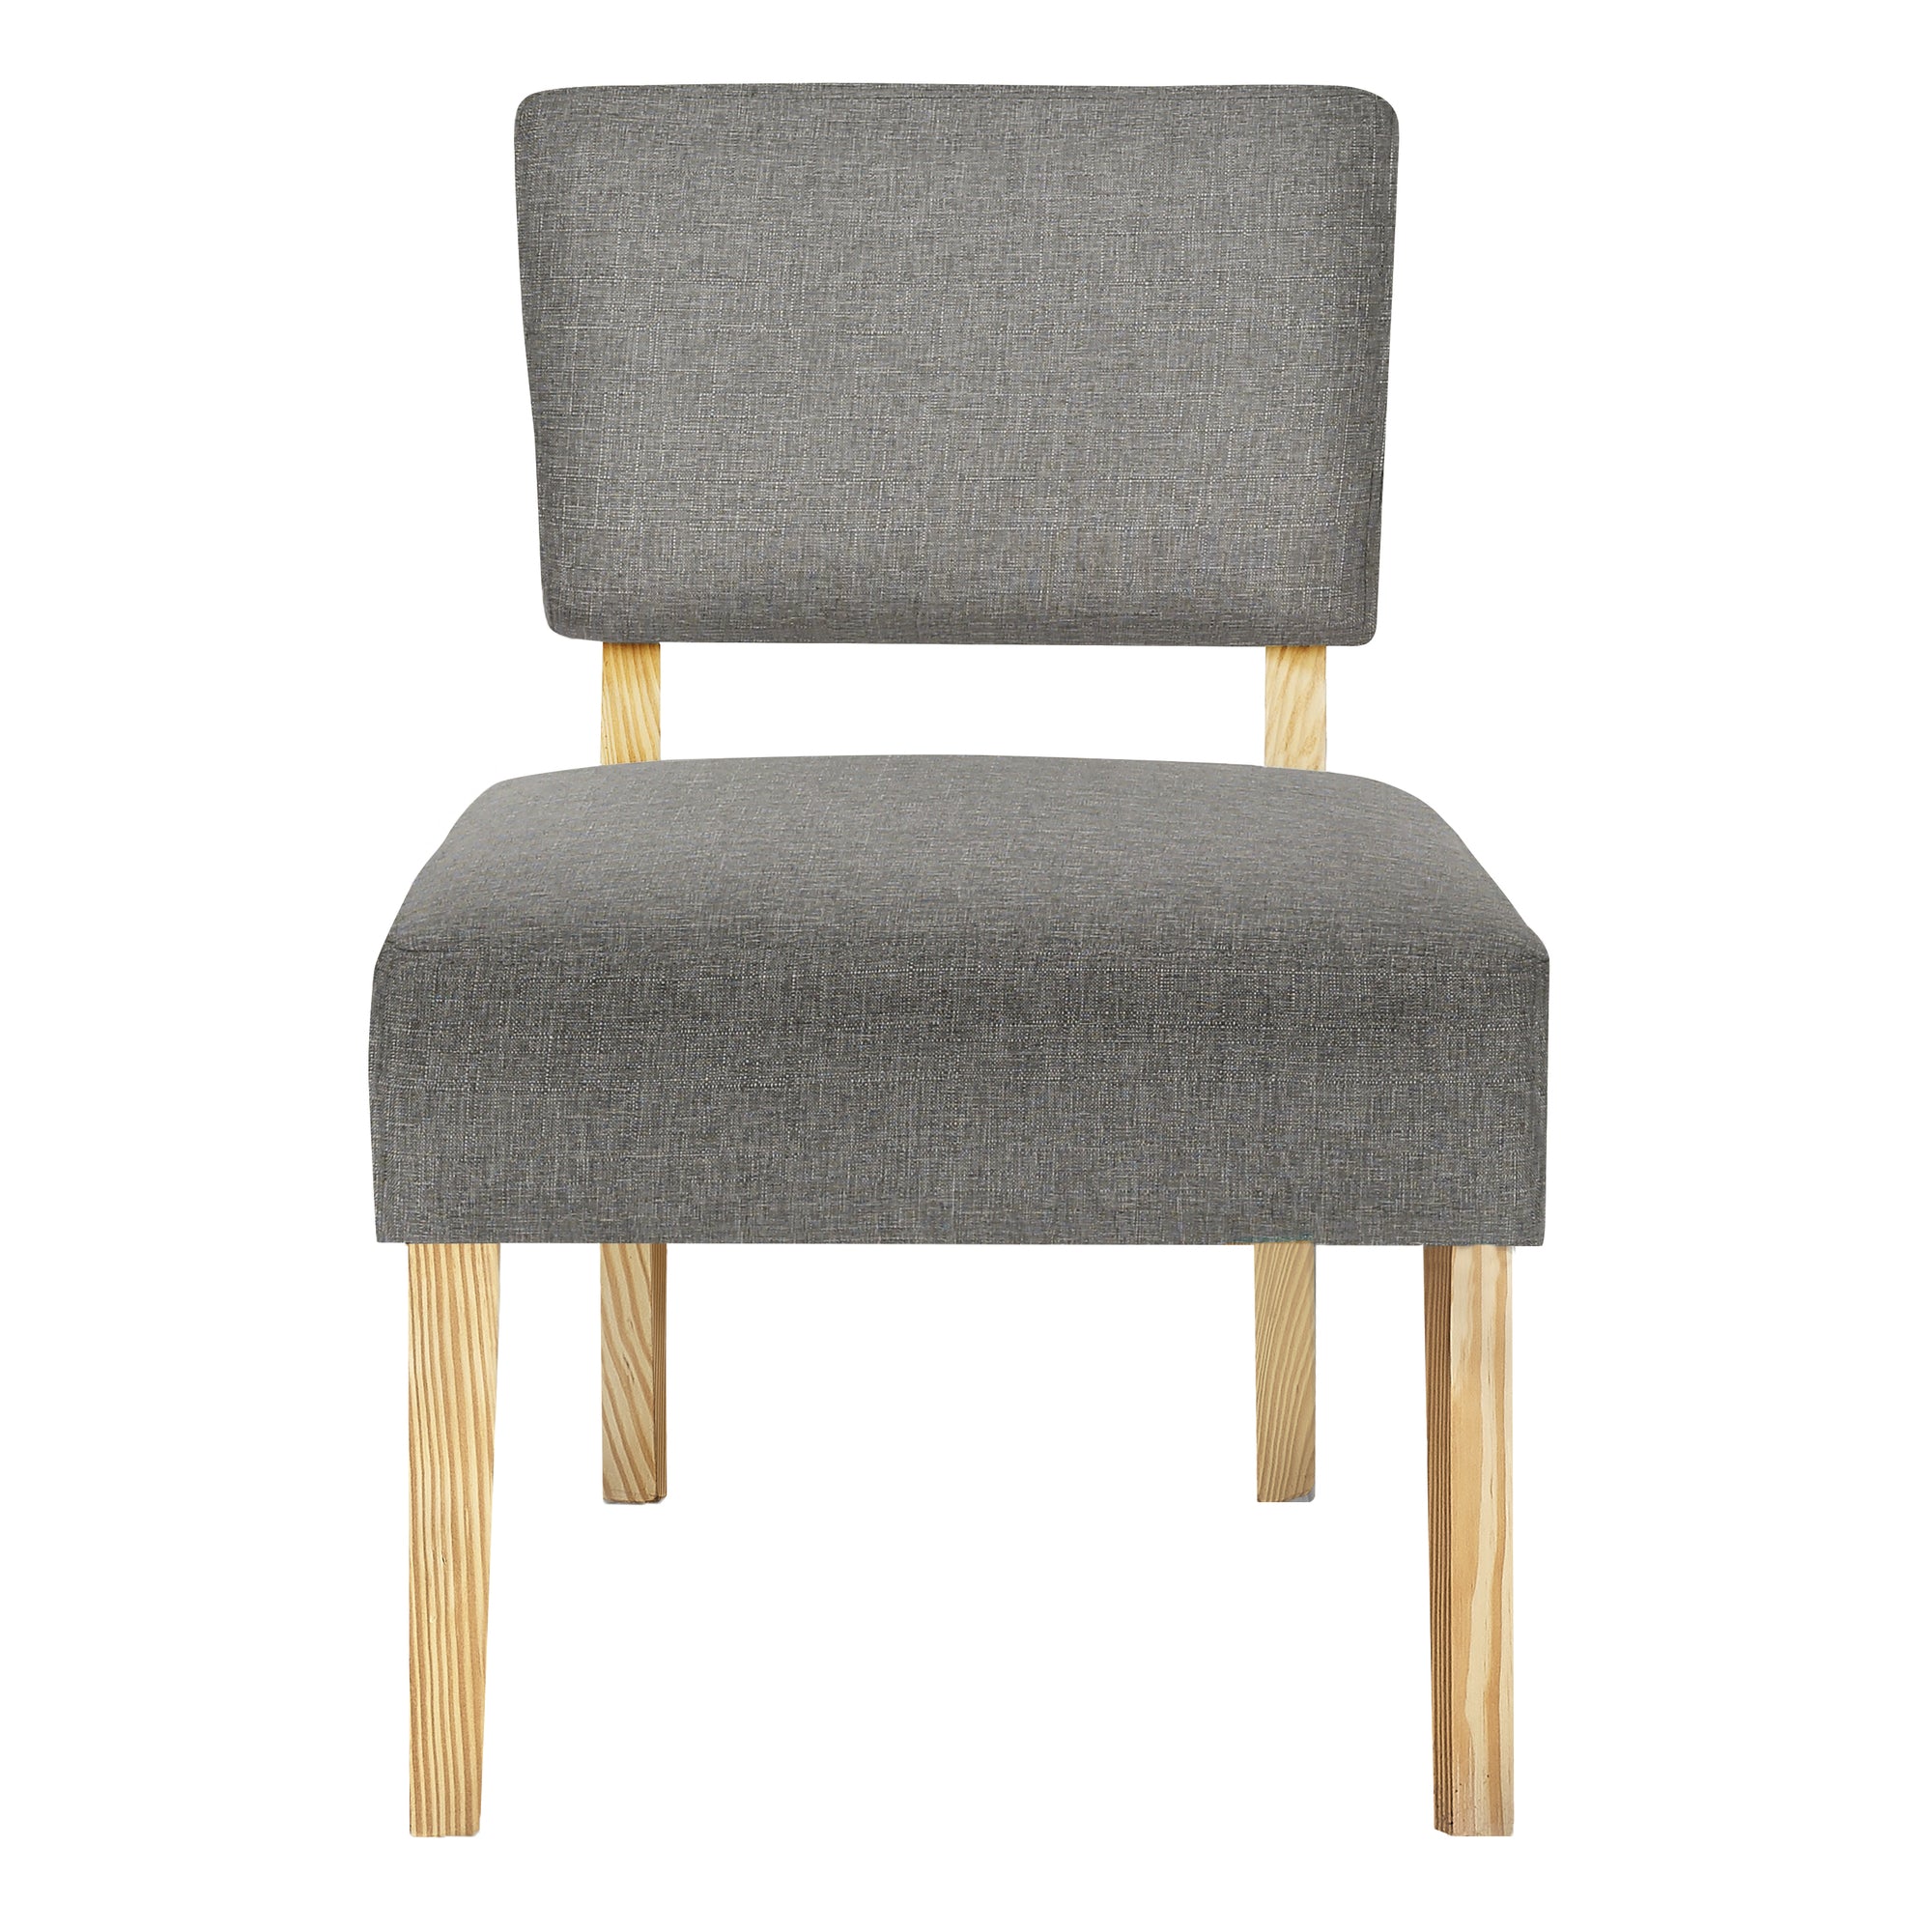 Accent Chair - Light Grey Fabric / Natural Wood Legs